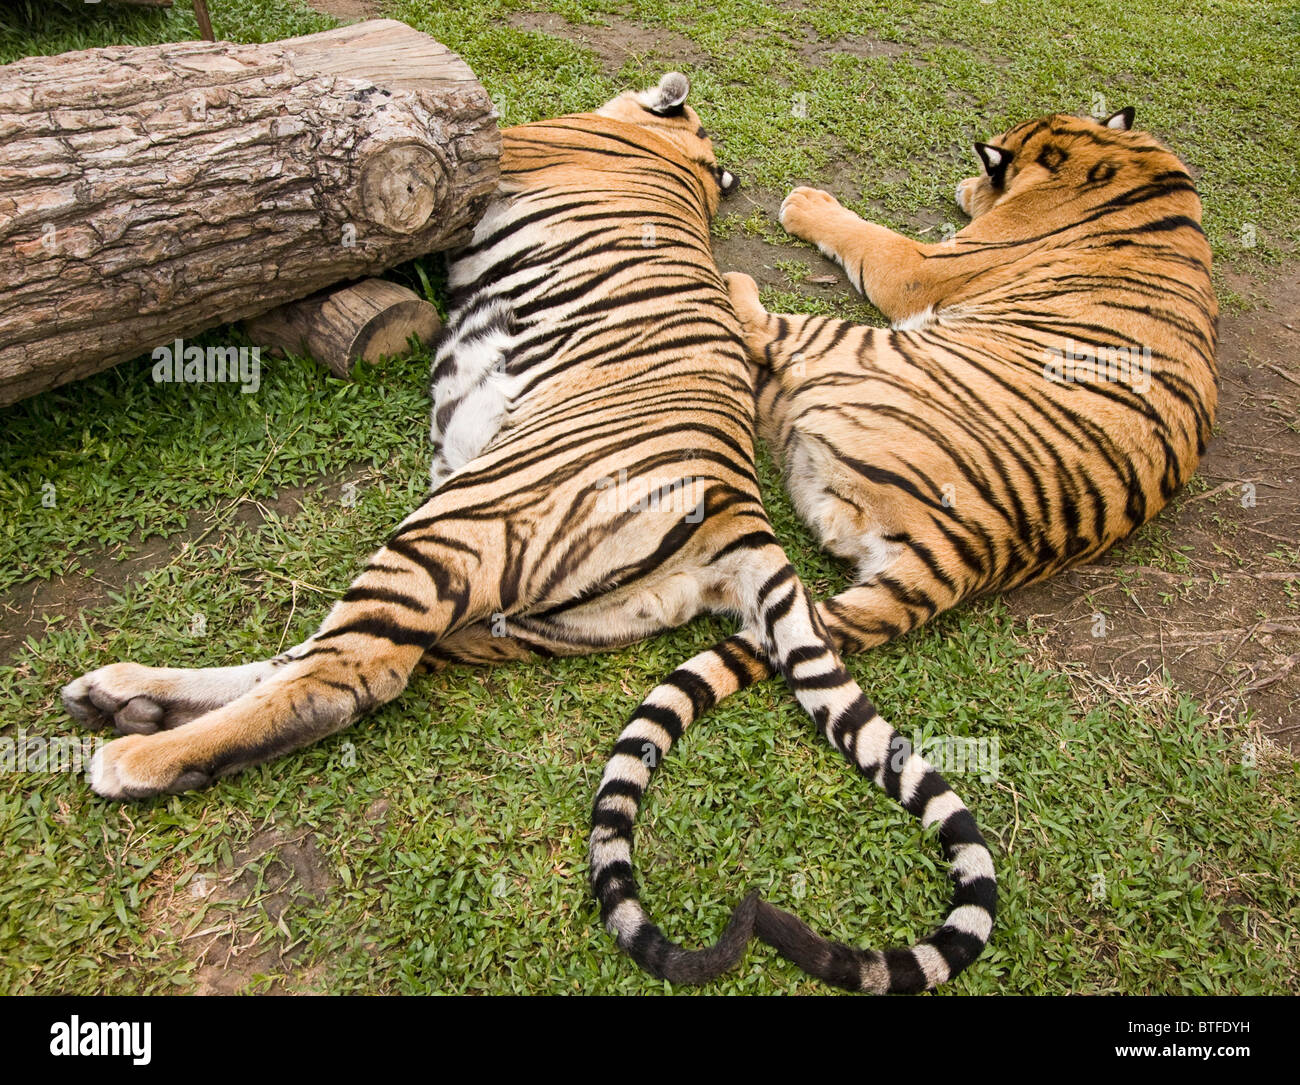 Tiger Tails Form A Heart At Tiger Kingdom A Tourist Facility Where Stock Photo Alamy